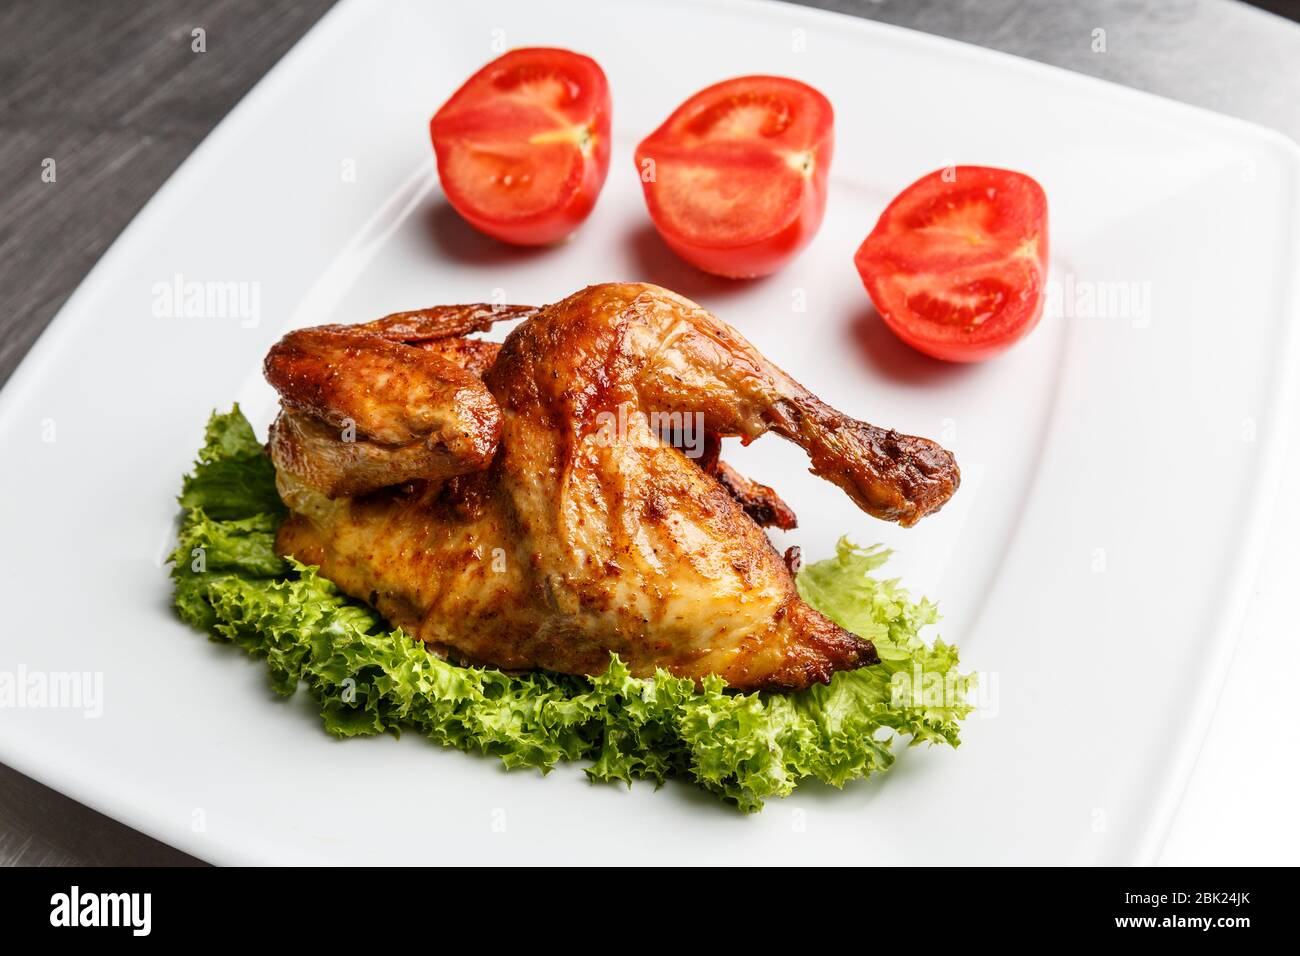 Half of grilled chick served with salad leaves and tomatoes on a white plate in a restaurant Stock Photo